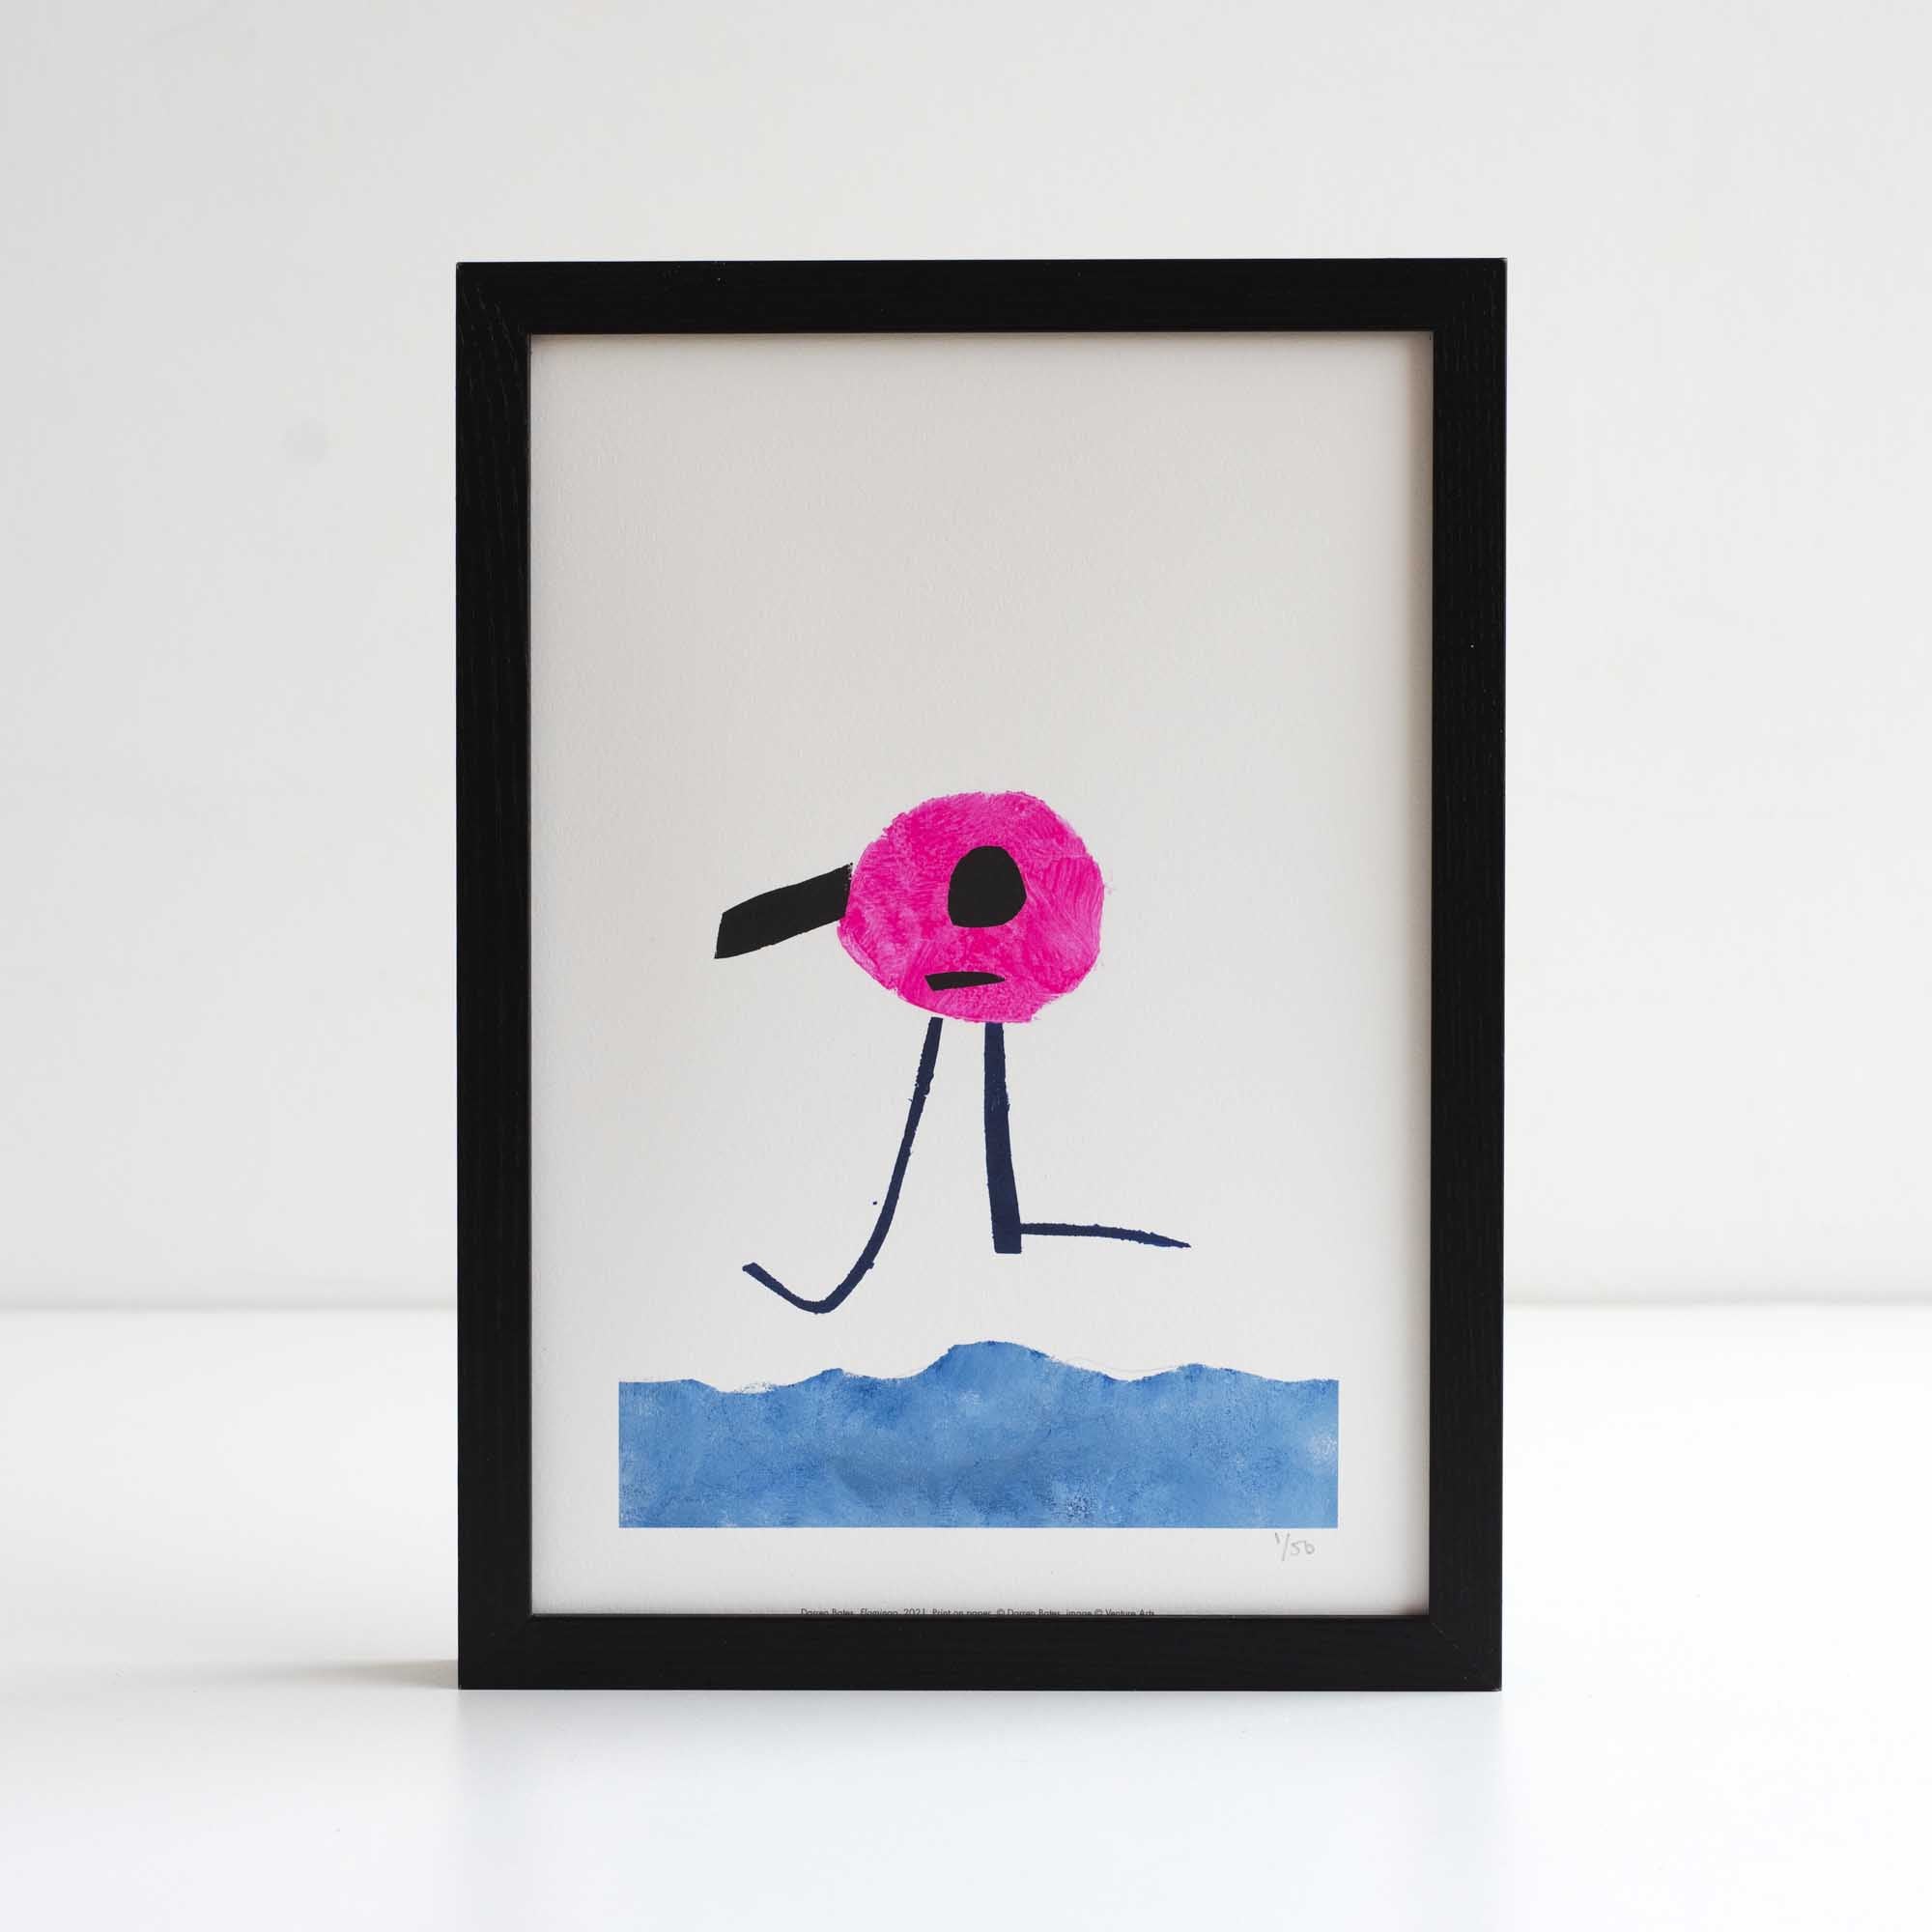 Framed reproduction of Flamingo by Darren Bates.